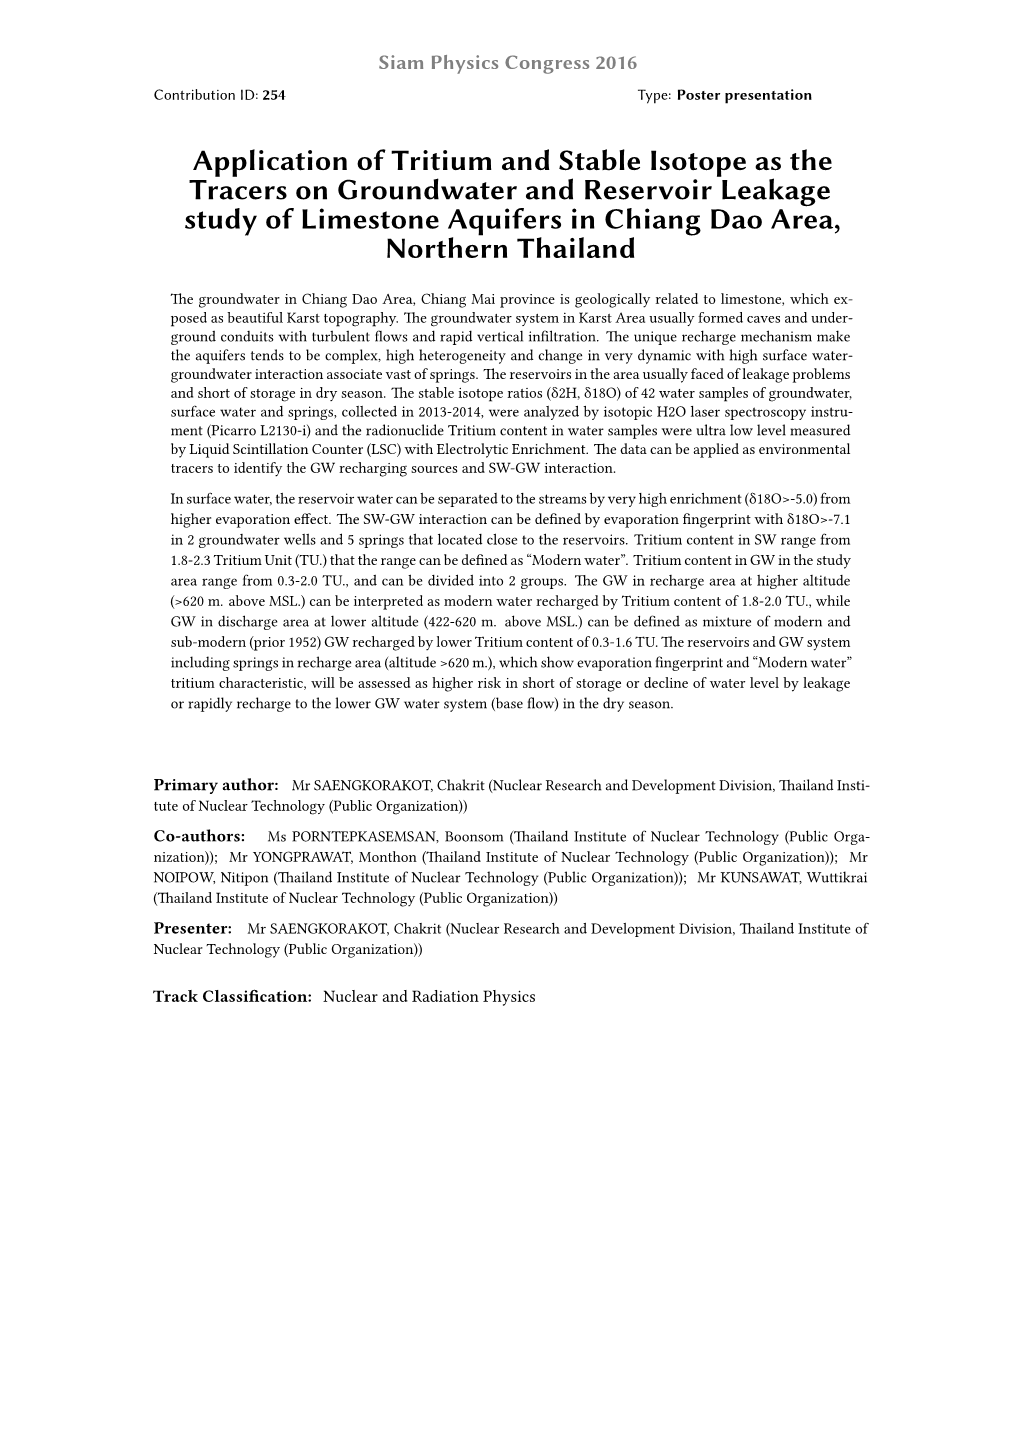 Application of Tritium and Stable Isotope As the Tracers on Groundwater and Reservoir Leakage Study of Limestone Aquifers in Chiang Dao Area, Northern Thailand